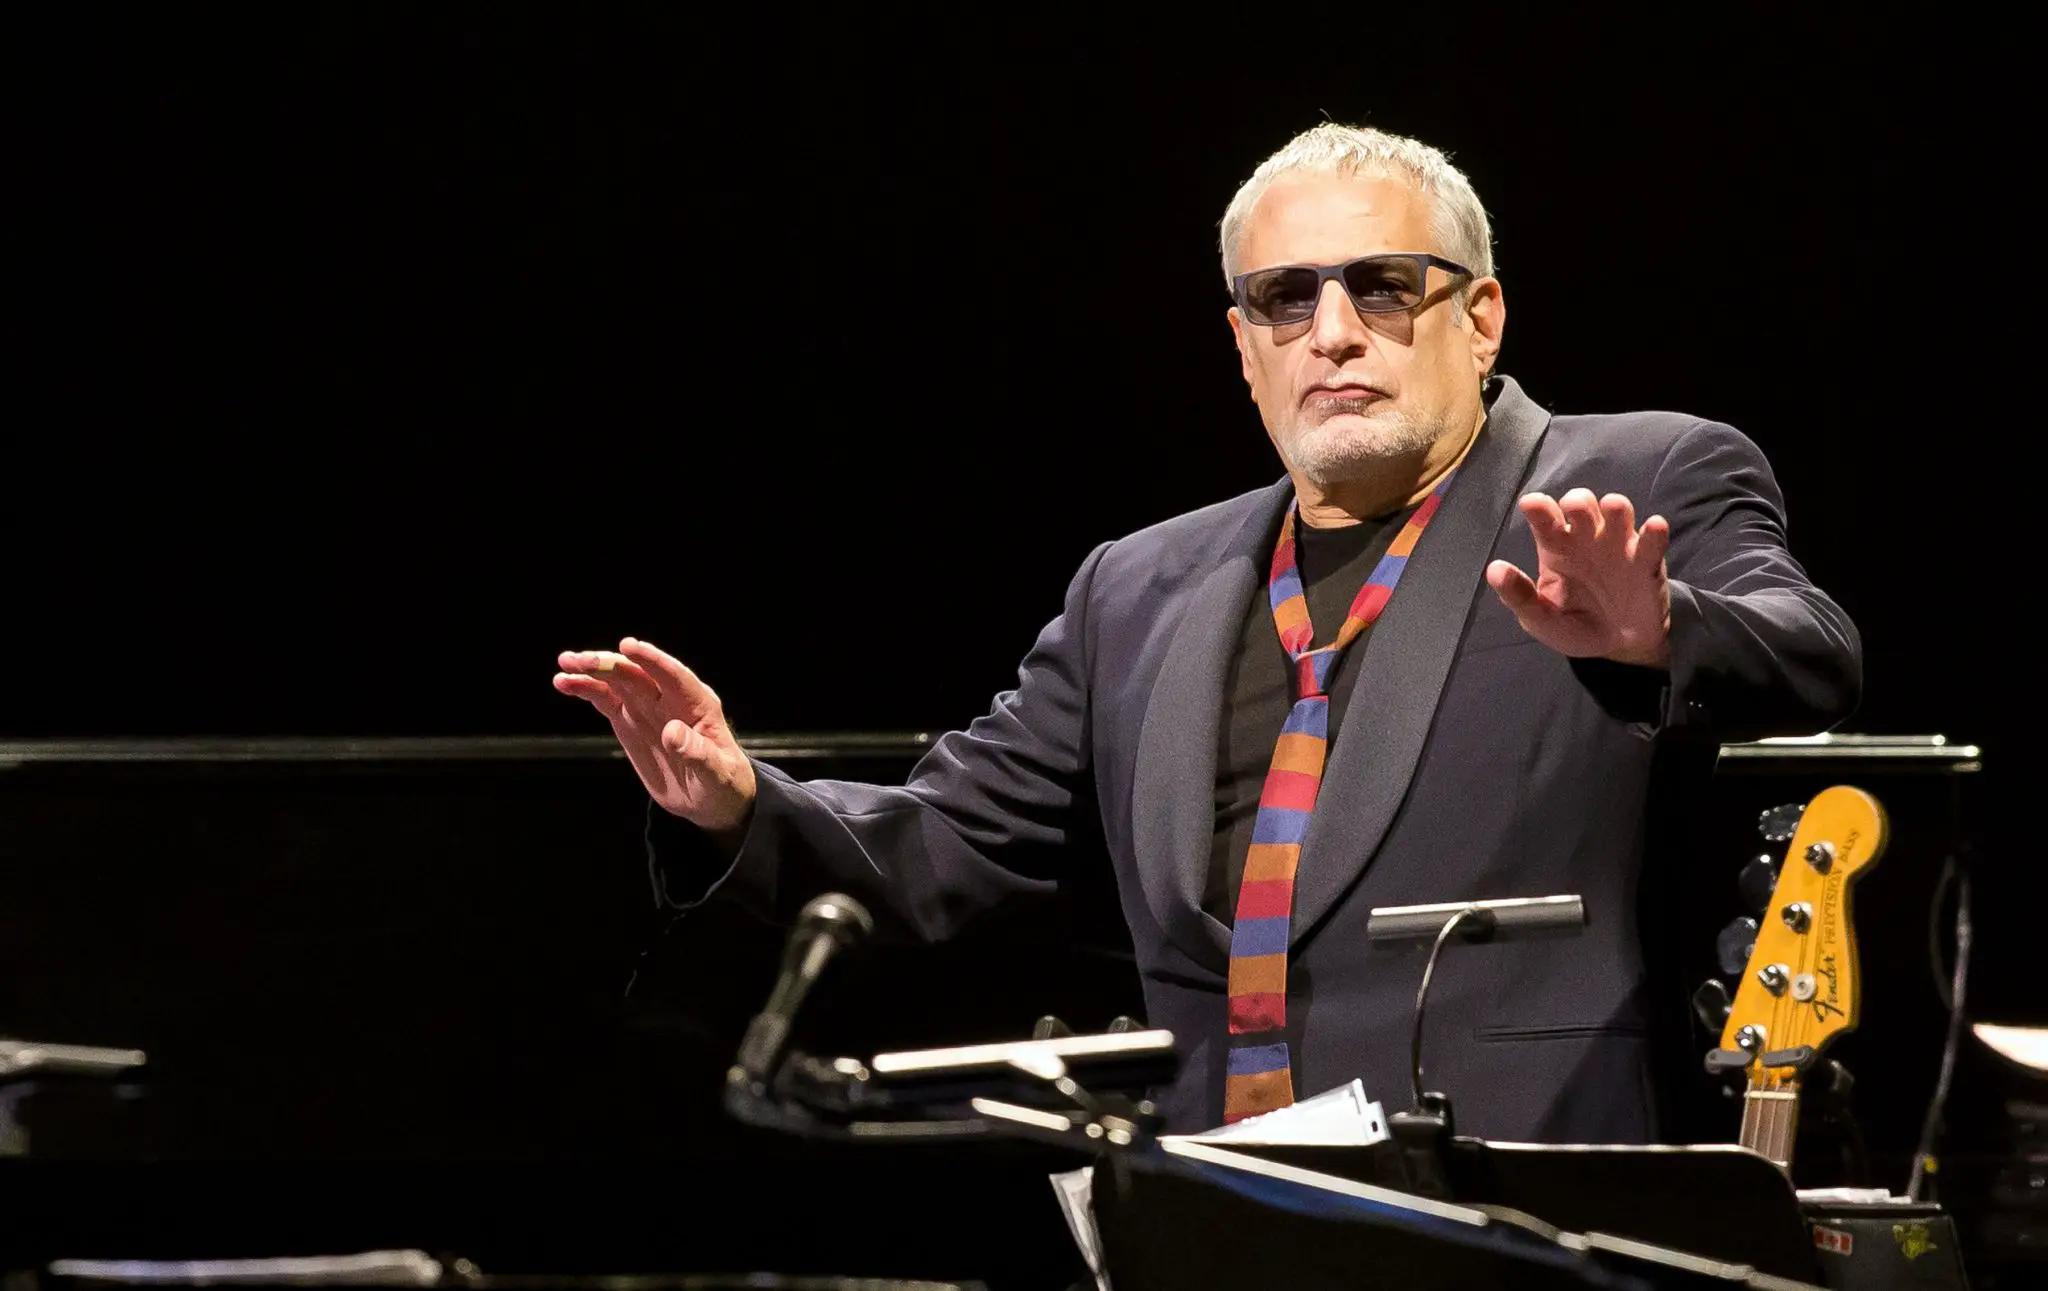 Donald Fagen Bio, Wiki, Age, Wife, Baby, Illness, Songs, Albums, and